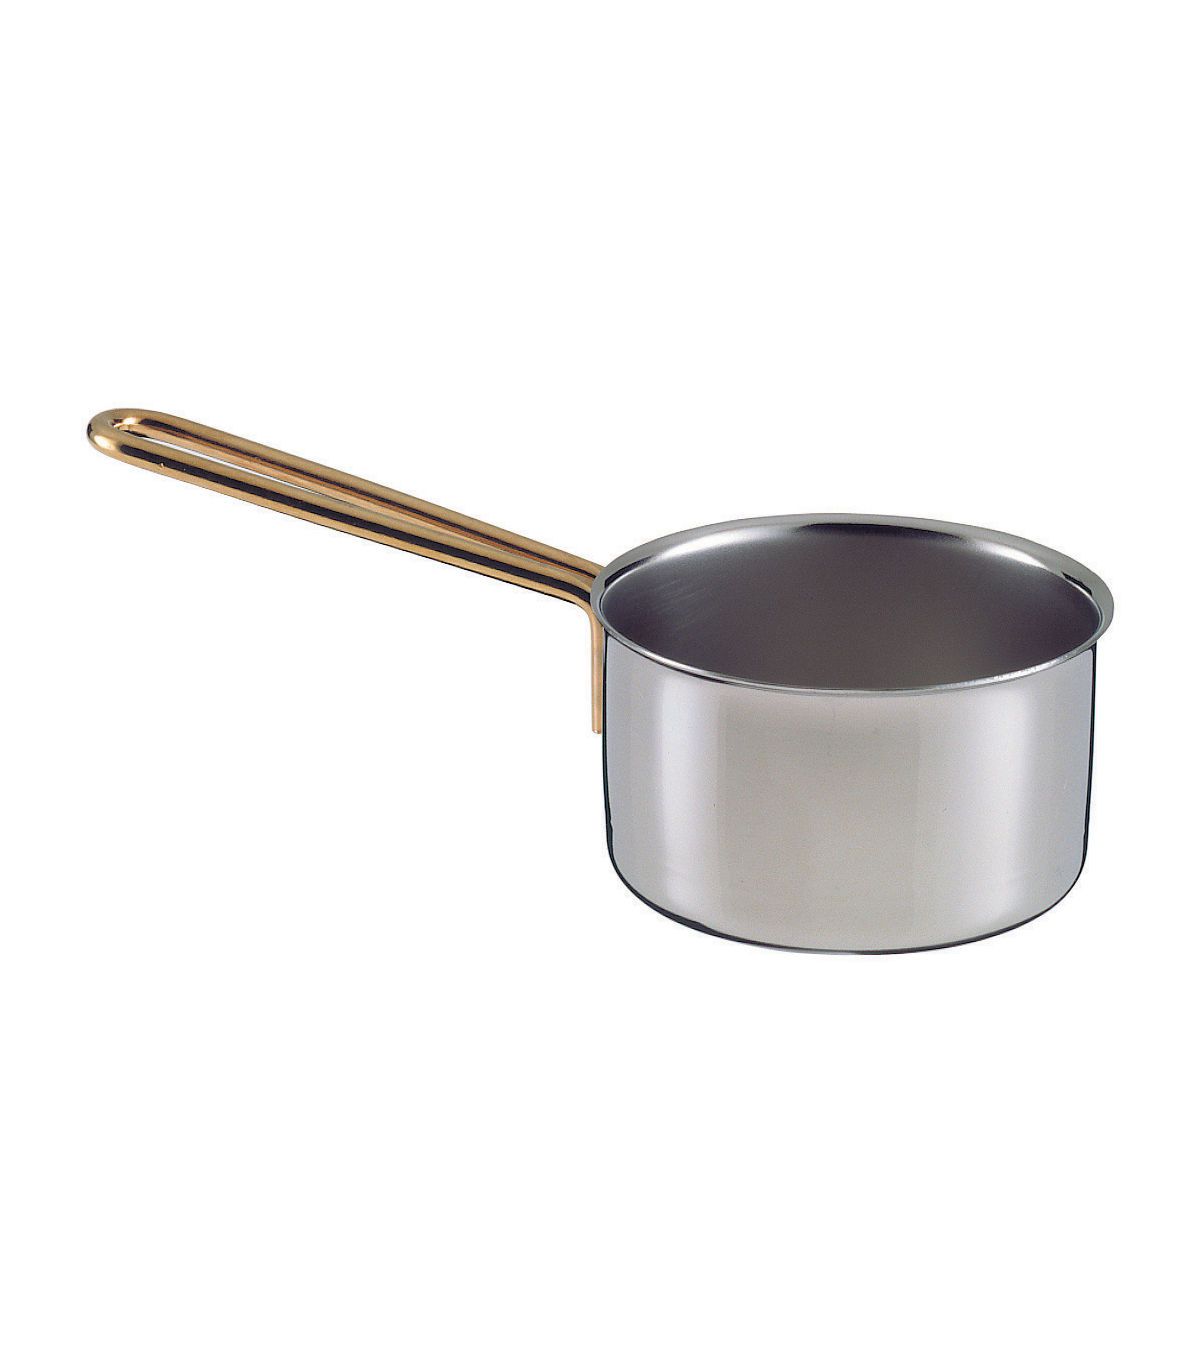 https://www.stellinox.com/2044-superlarge_default/small-saucepan-o-10-cm-stainless-steel-with-gold-plated-handle.jpg